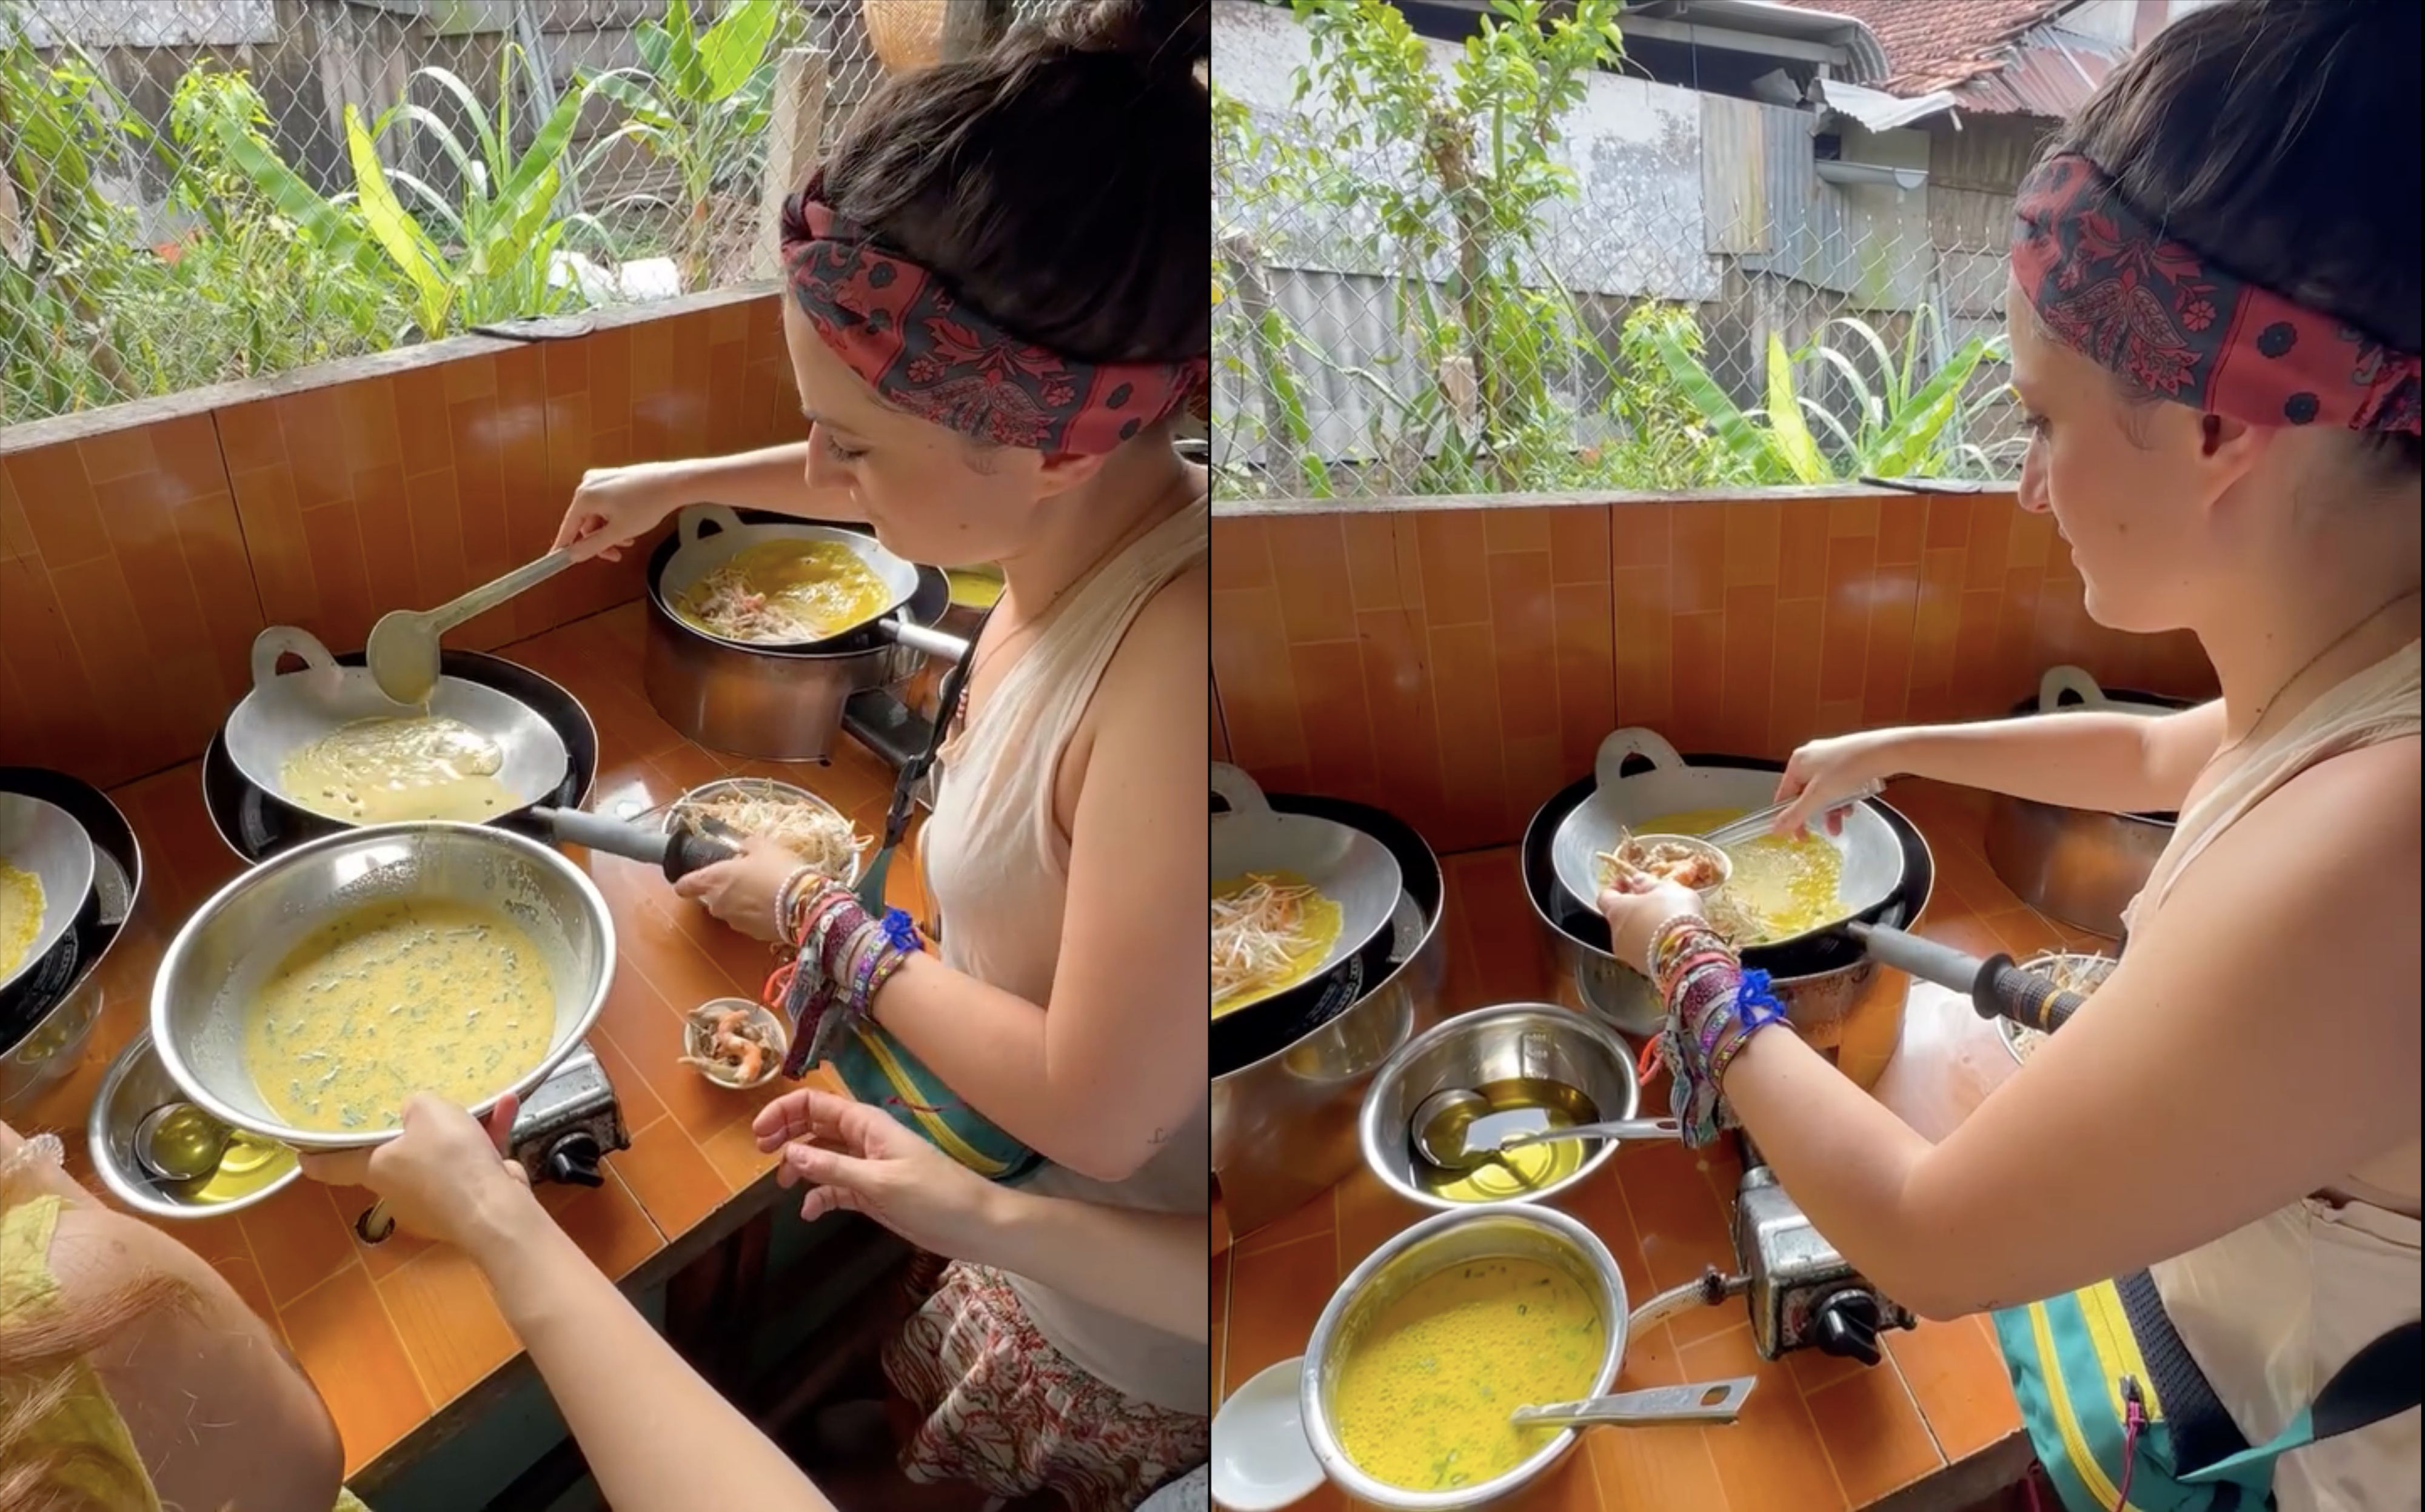 Ottavia Galbiati, a 34-year-old tourist from Italy, tries her hand at making ‘bánh xèo’ (Vietnamese sizzling crepe) during her visit to the Mekong Delta, Vietnam in December 2023. Photo: Ottavia Galbiati